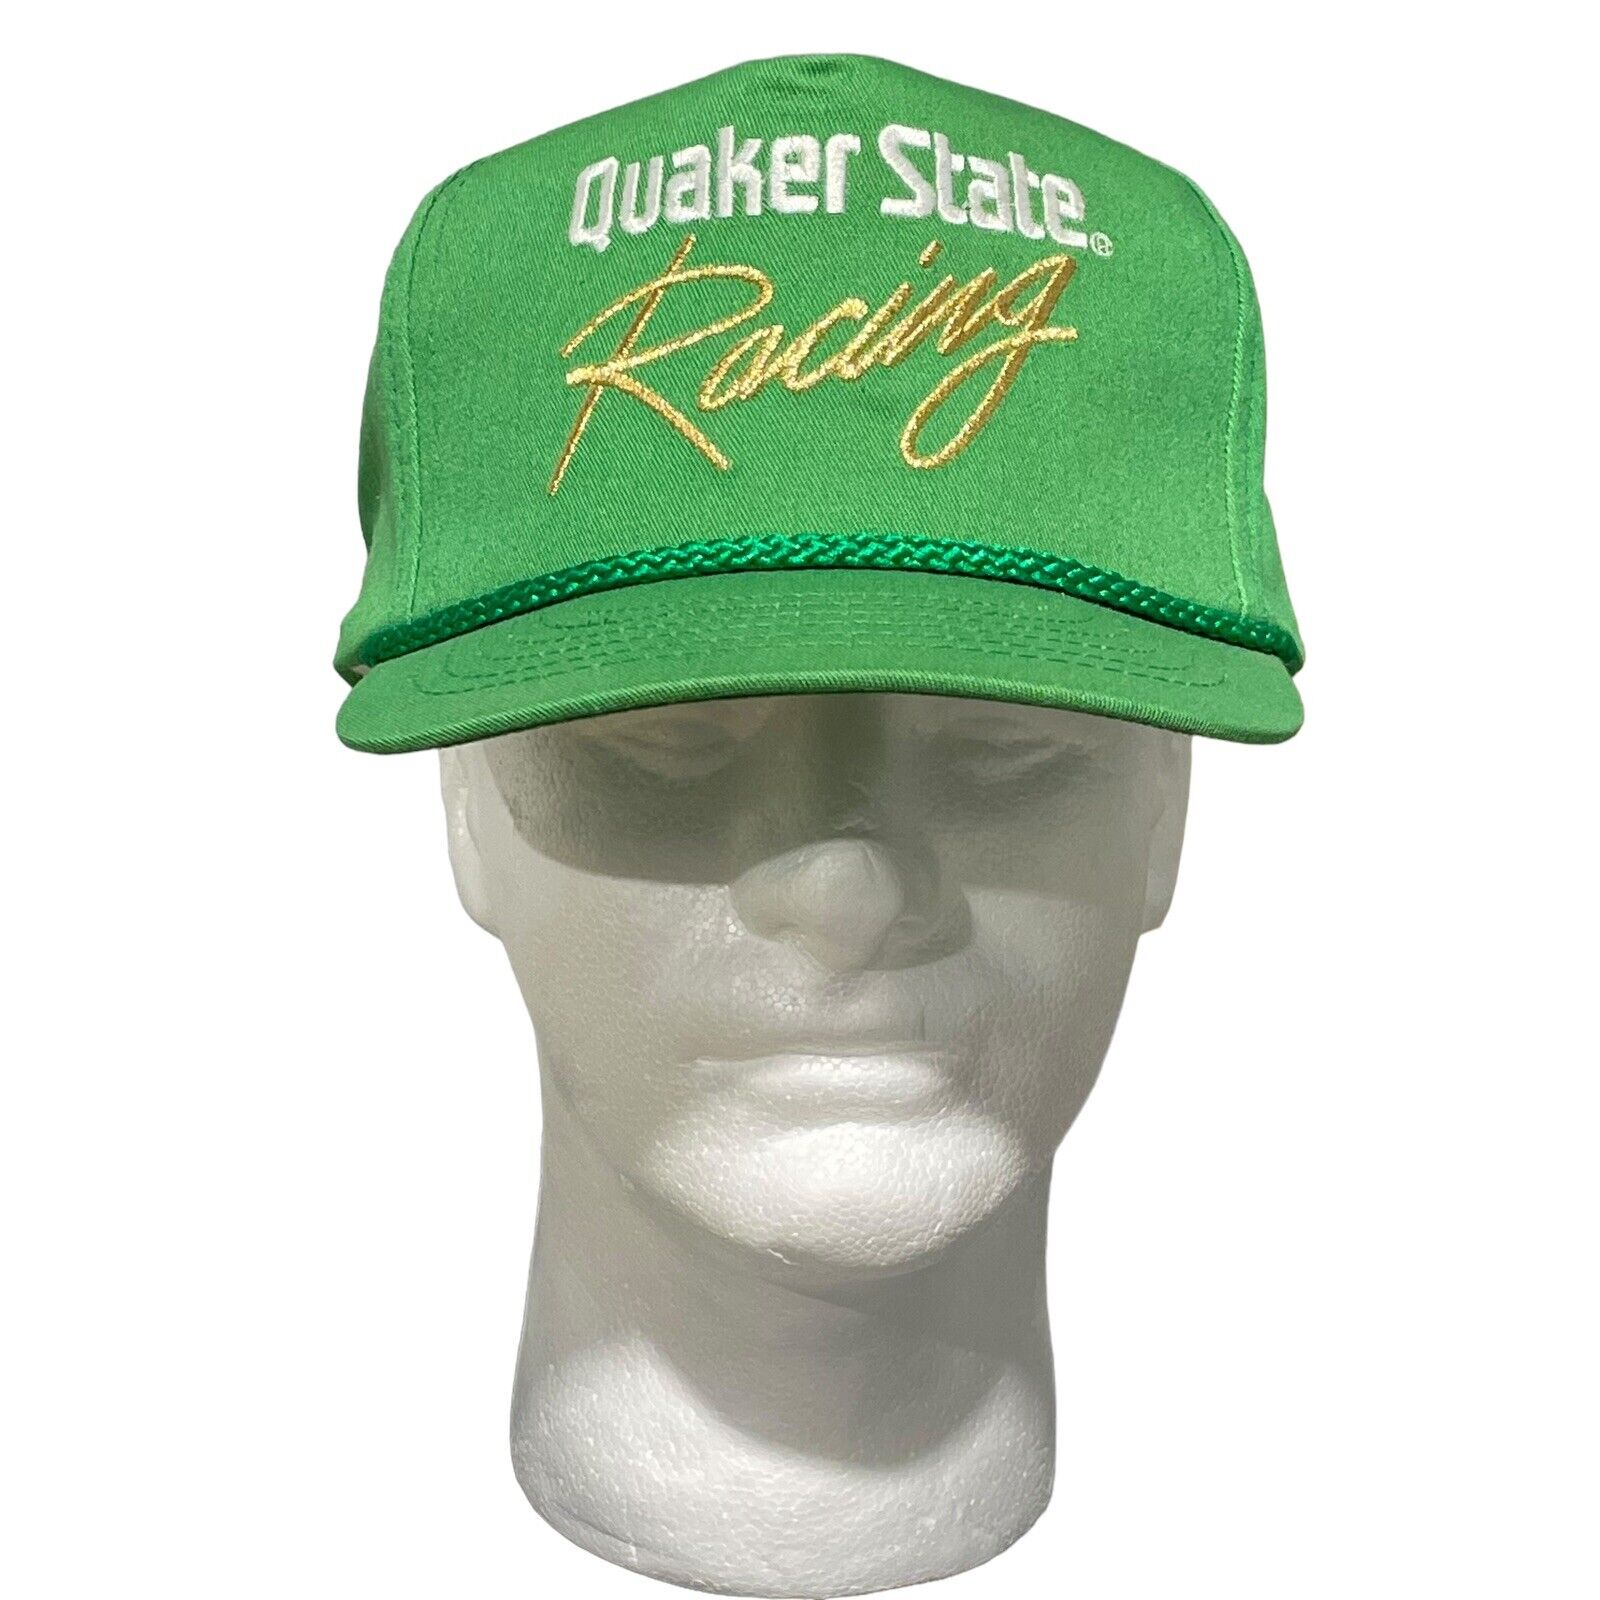 Vintage Quaker State Racing Rope Trucker Hat Adjustable Green 80’s Made In USA